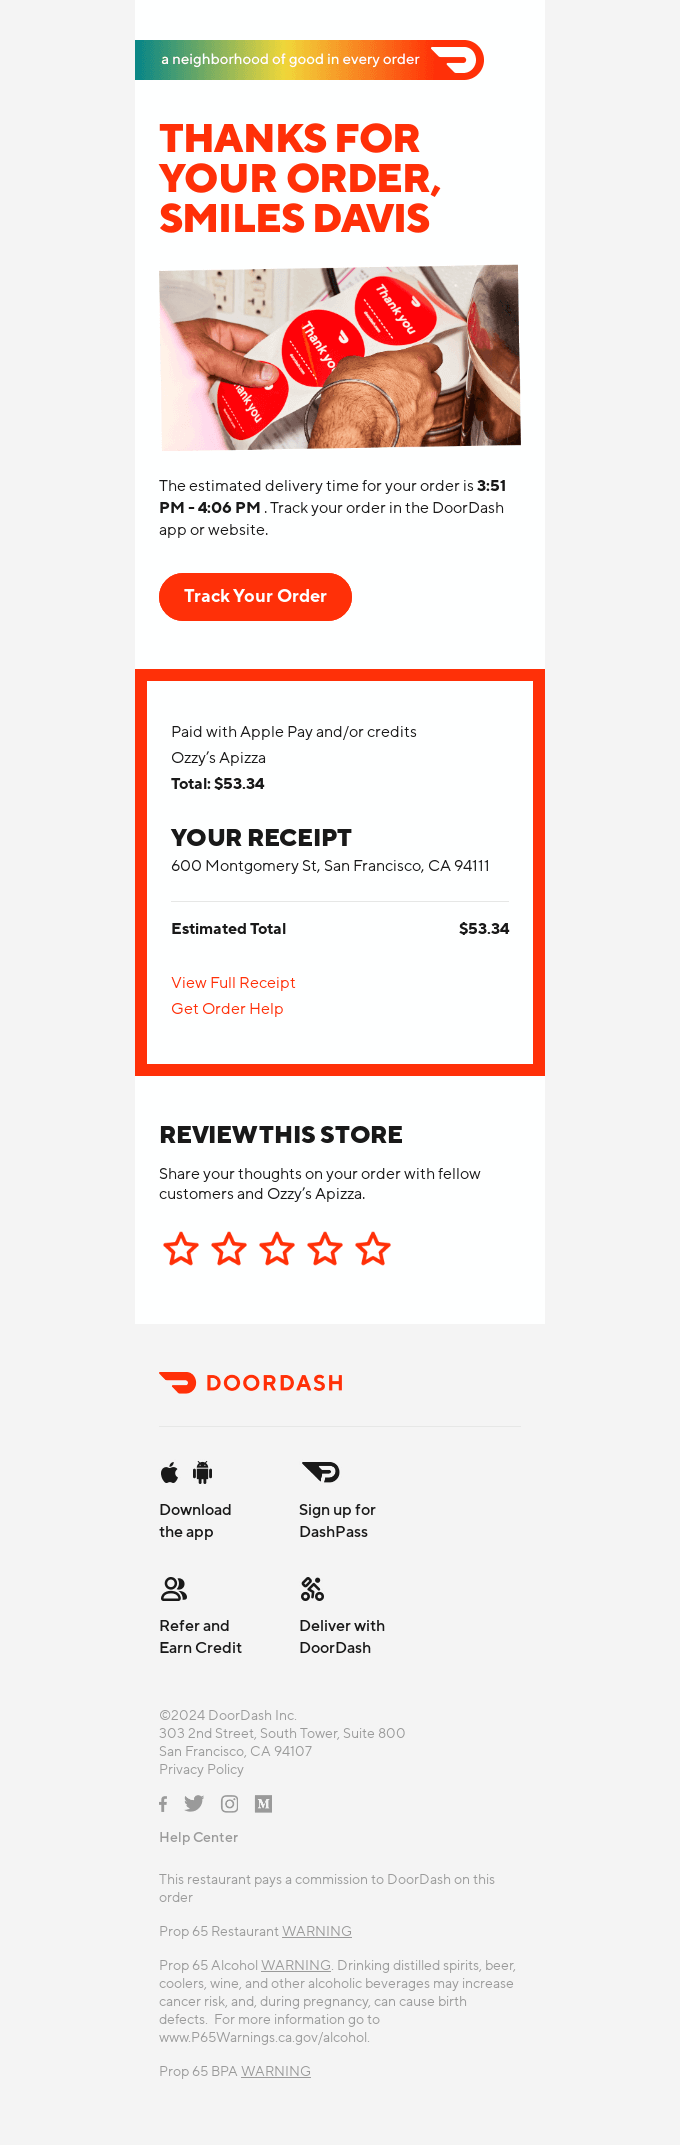 Order Confirmation for Smiles Davis from Ozzy’s Apizza